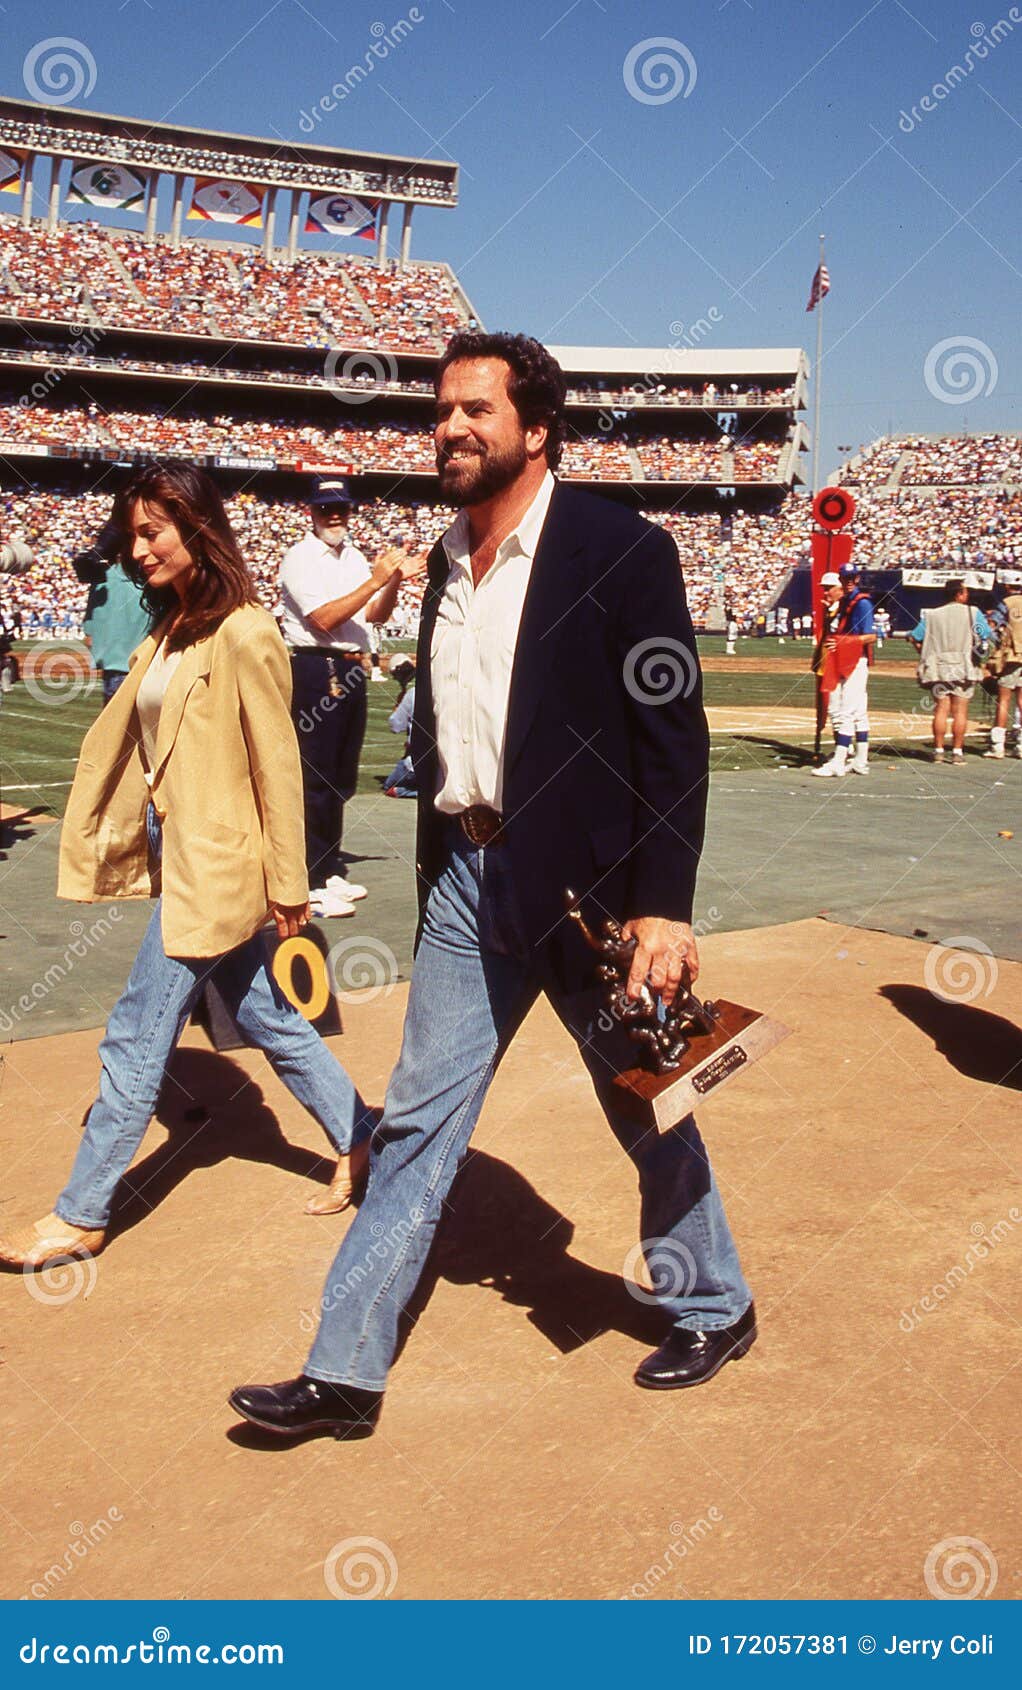 dan fouts hall of fame